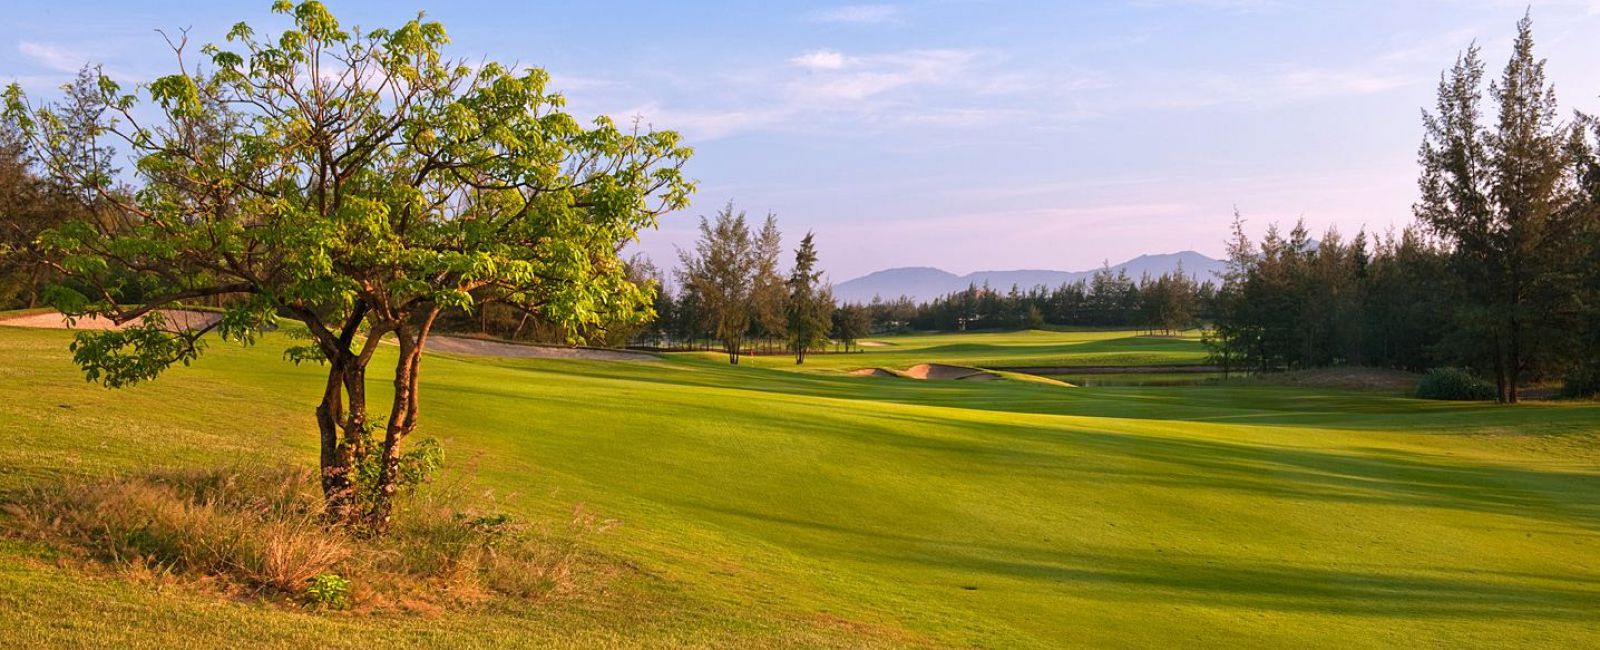 Danang Golf Package 3 Day 2 Nights and 2 Rounds